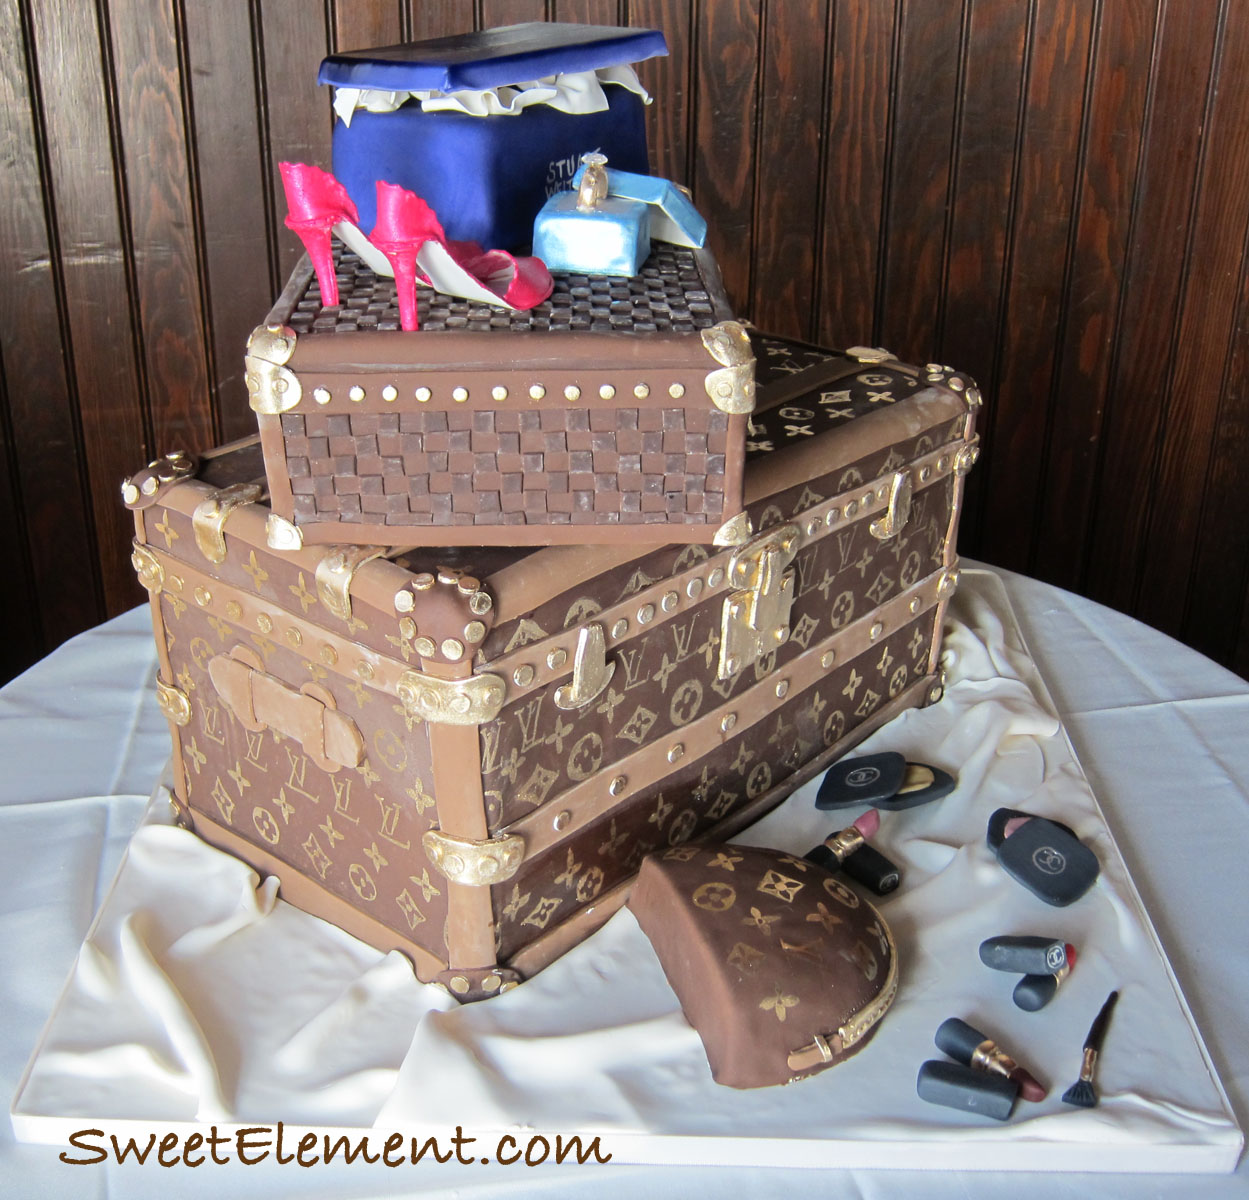 A chocolate Louis Vuitton Trunk cake I made this weekend : r/Baking